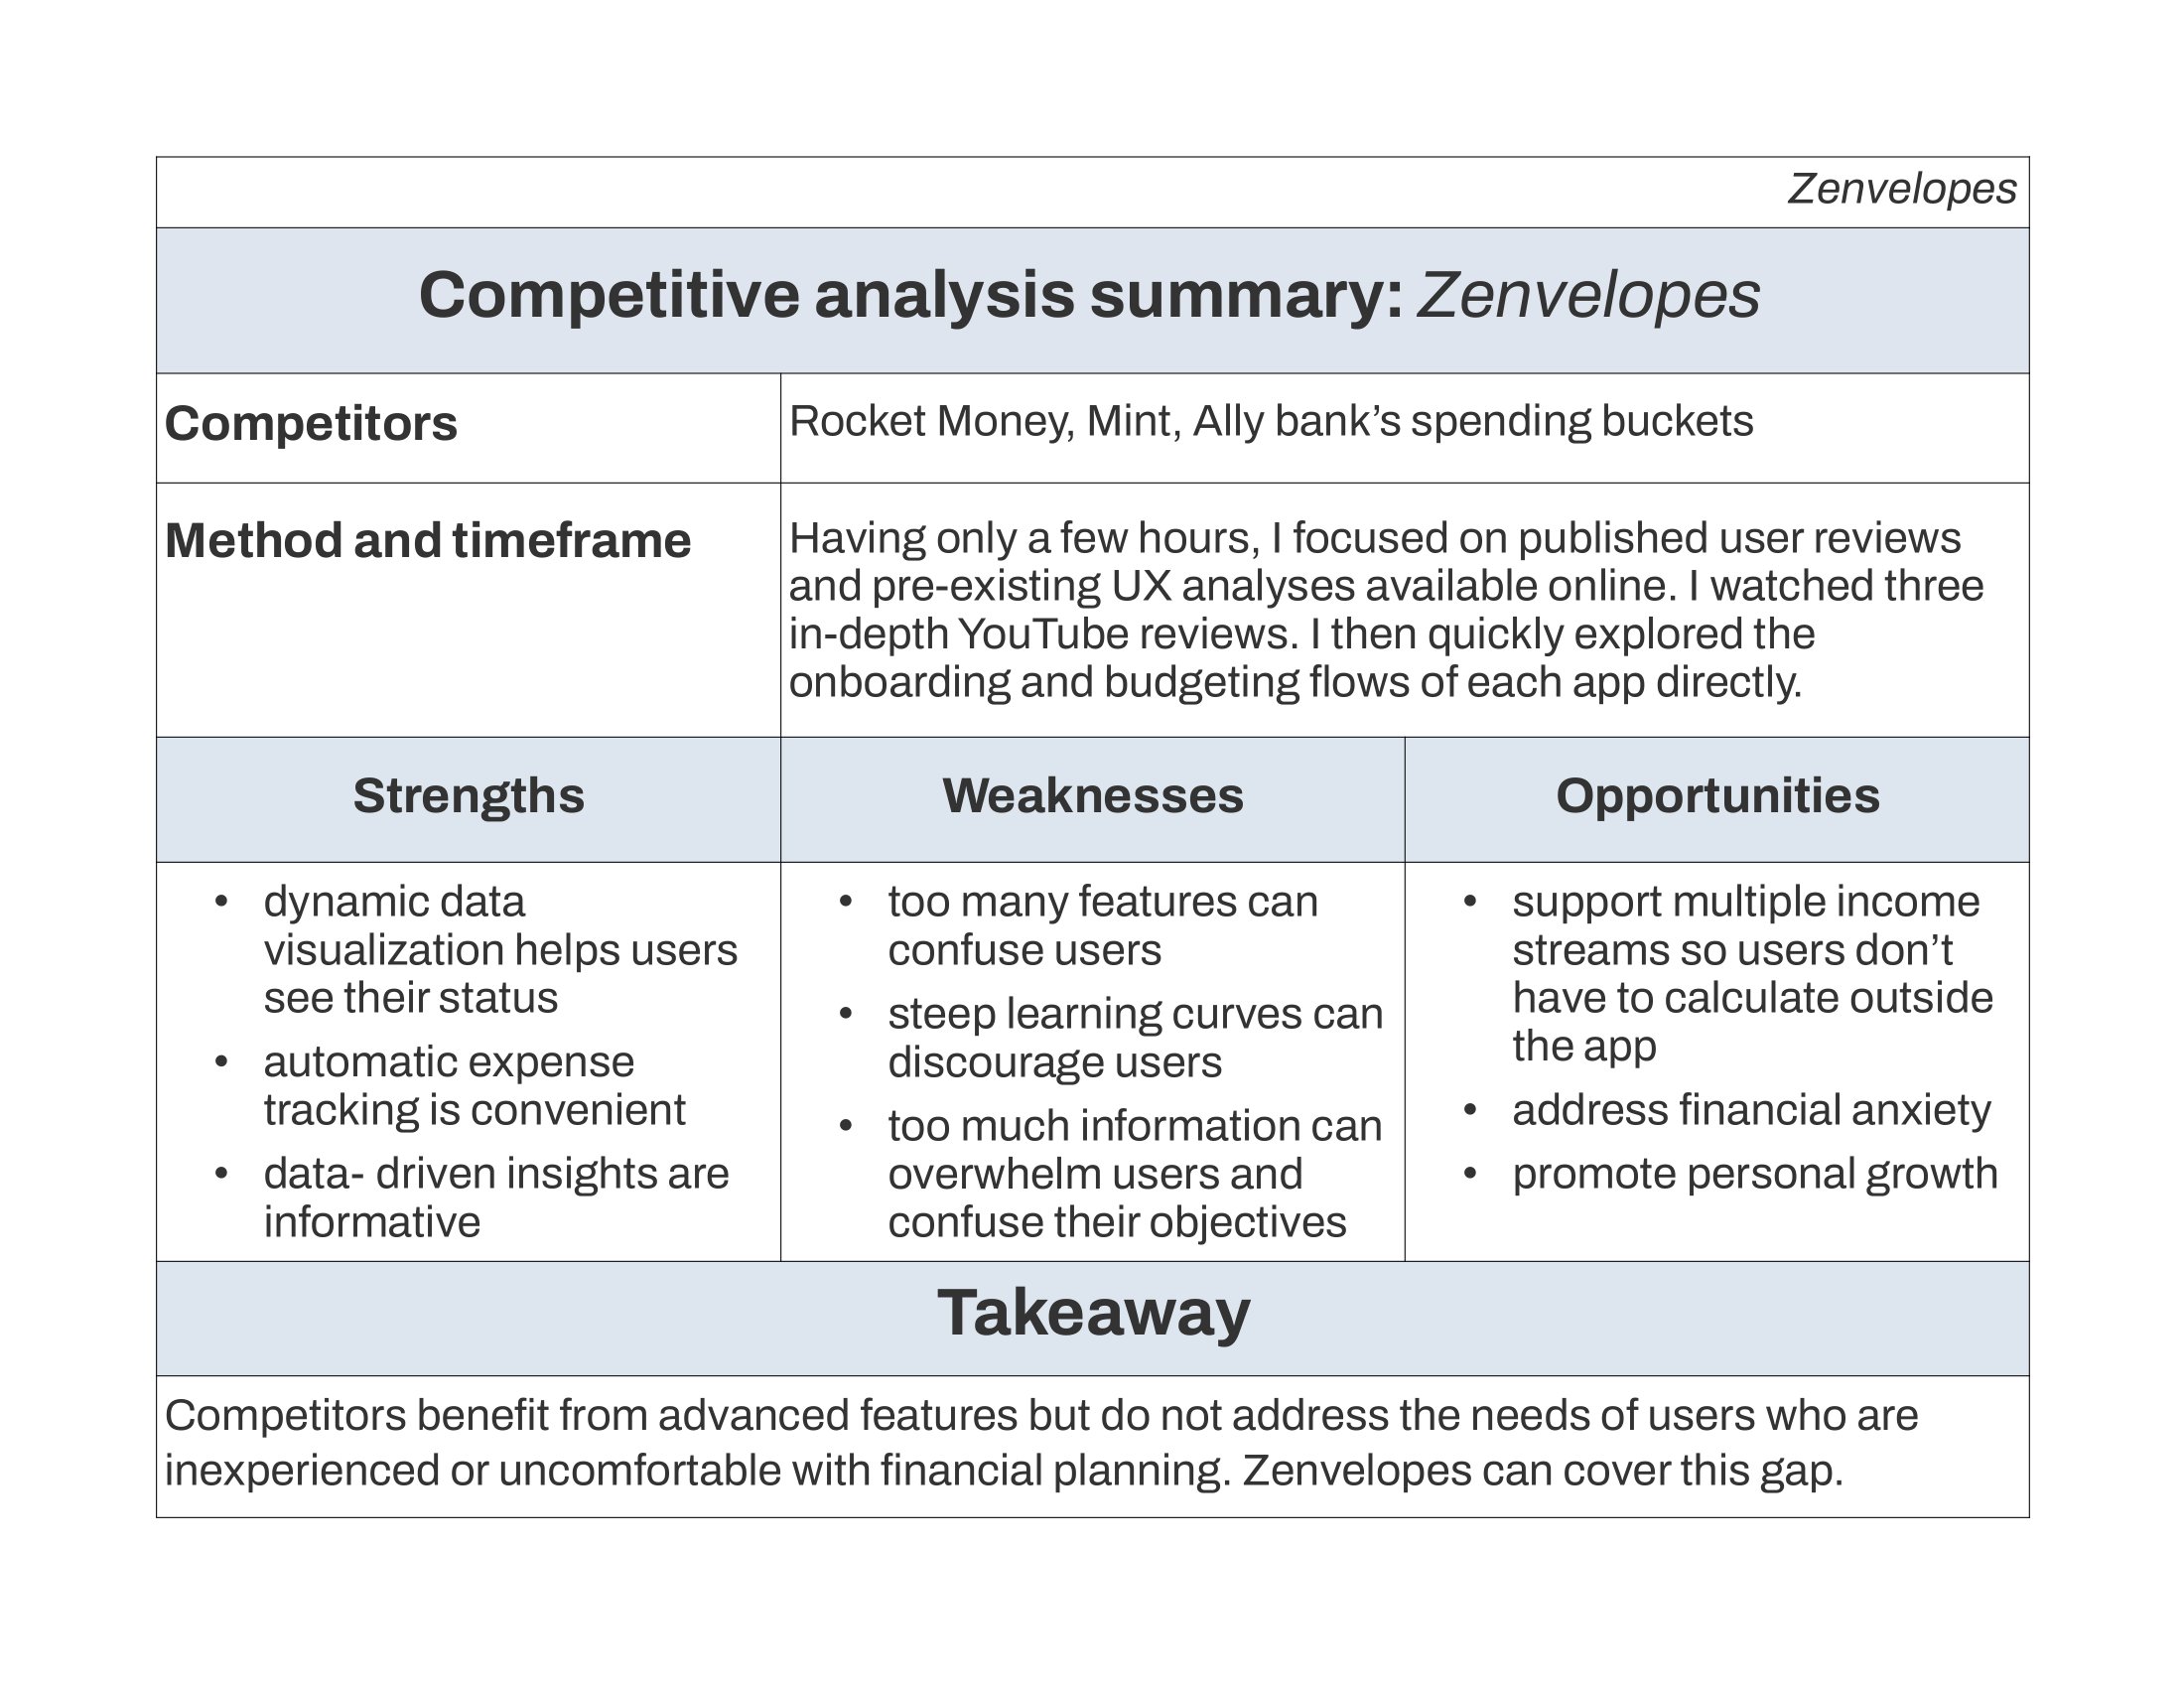 chart showing the strengths and weaknesses of competitors